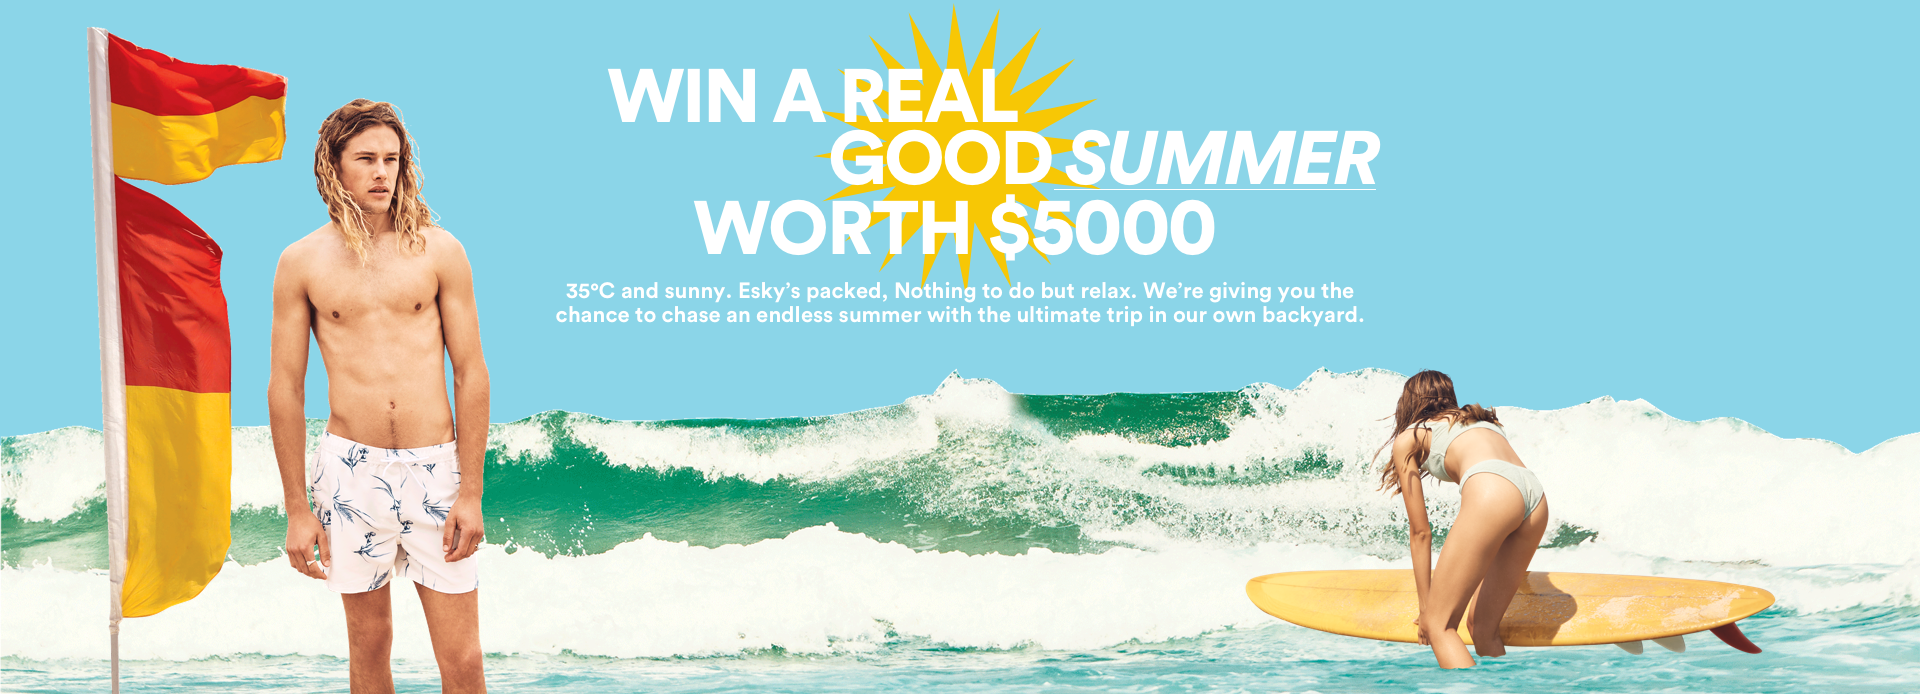 Win a Real Good Summer Worth $5000